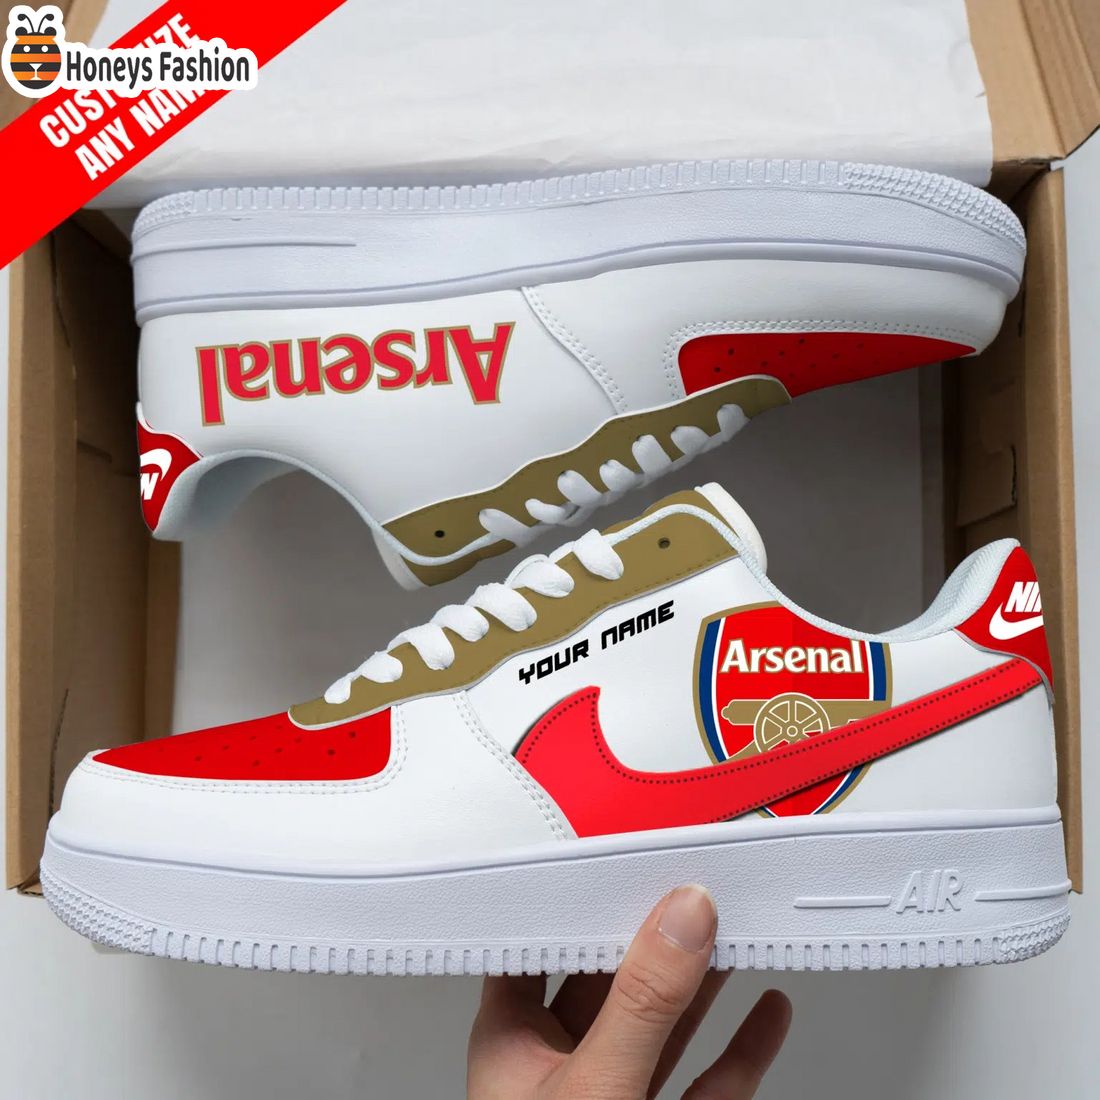 Arsenal Personalized Nike Air Force Sneakers